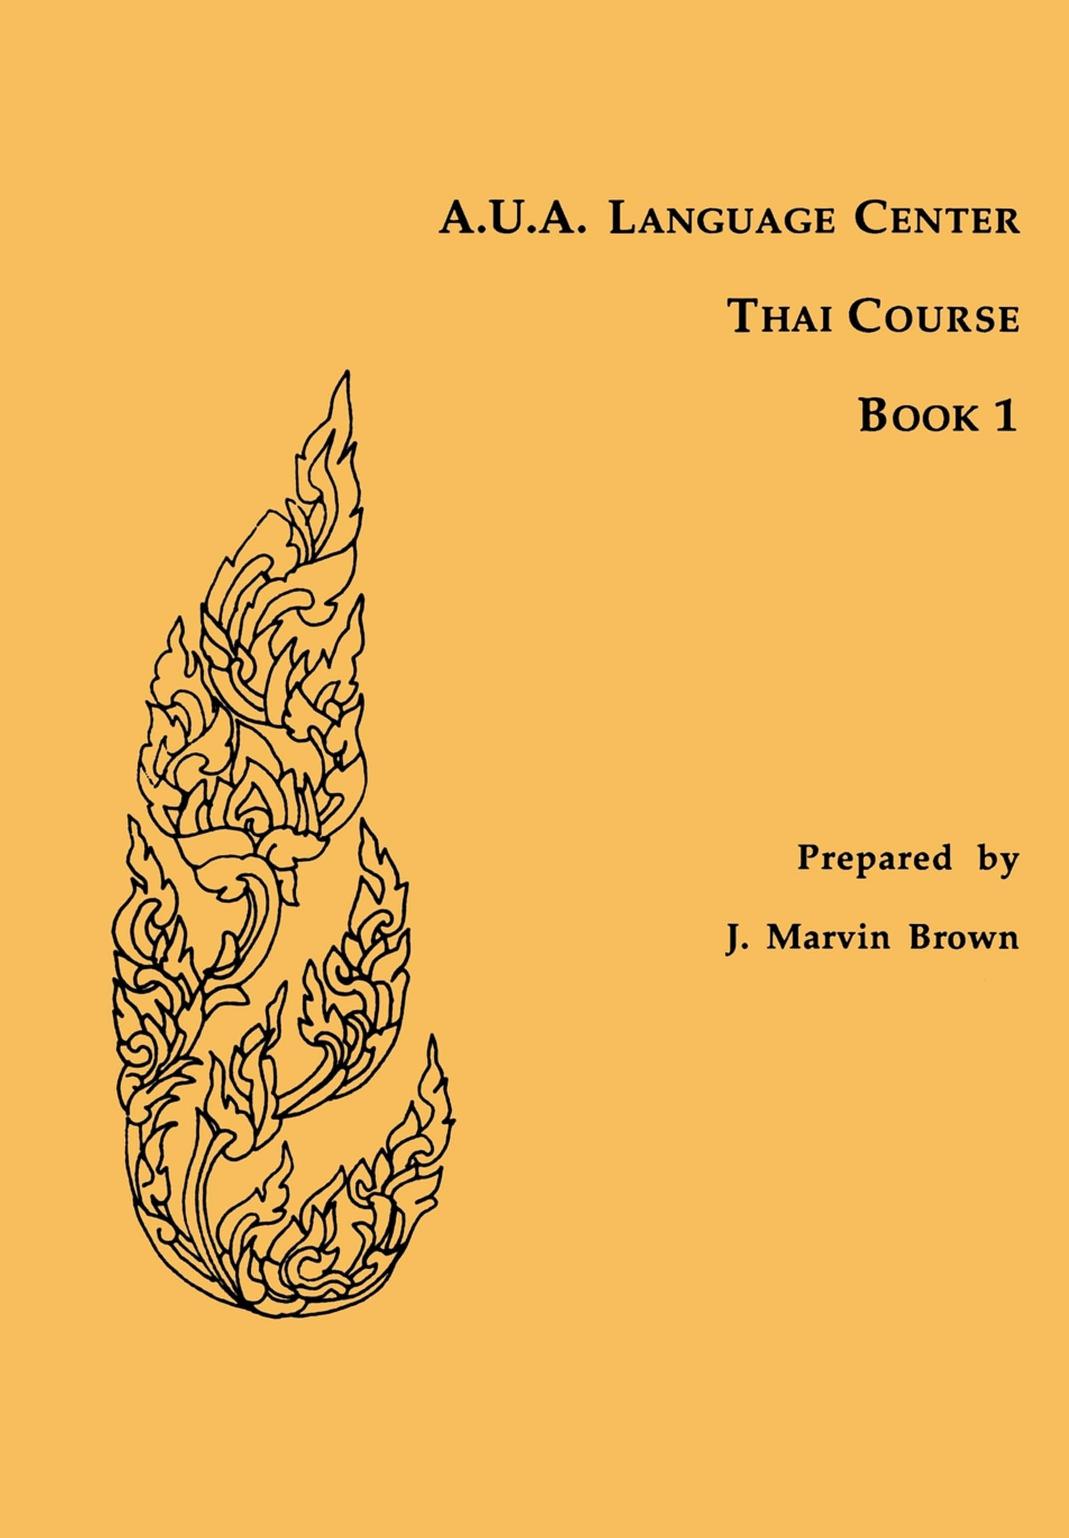 A.U.A. Language Center Thai Course: Book 1 by J. Marvin Brown